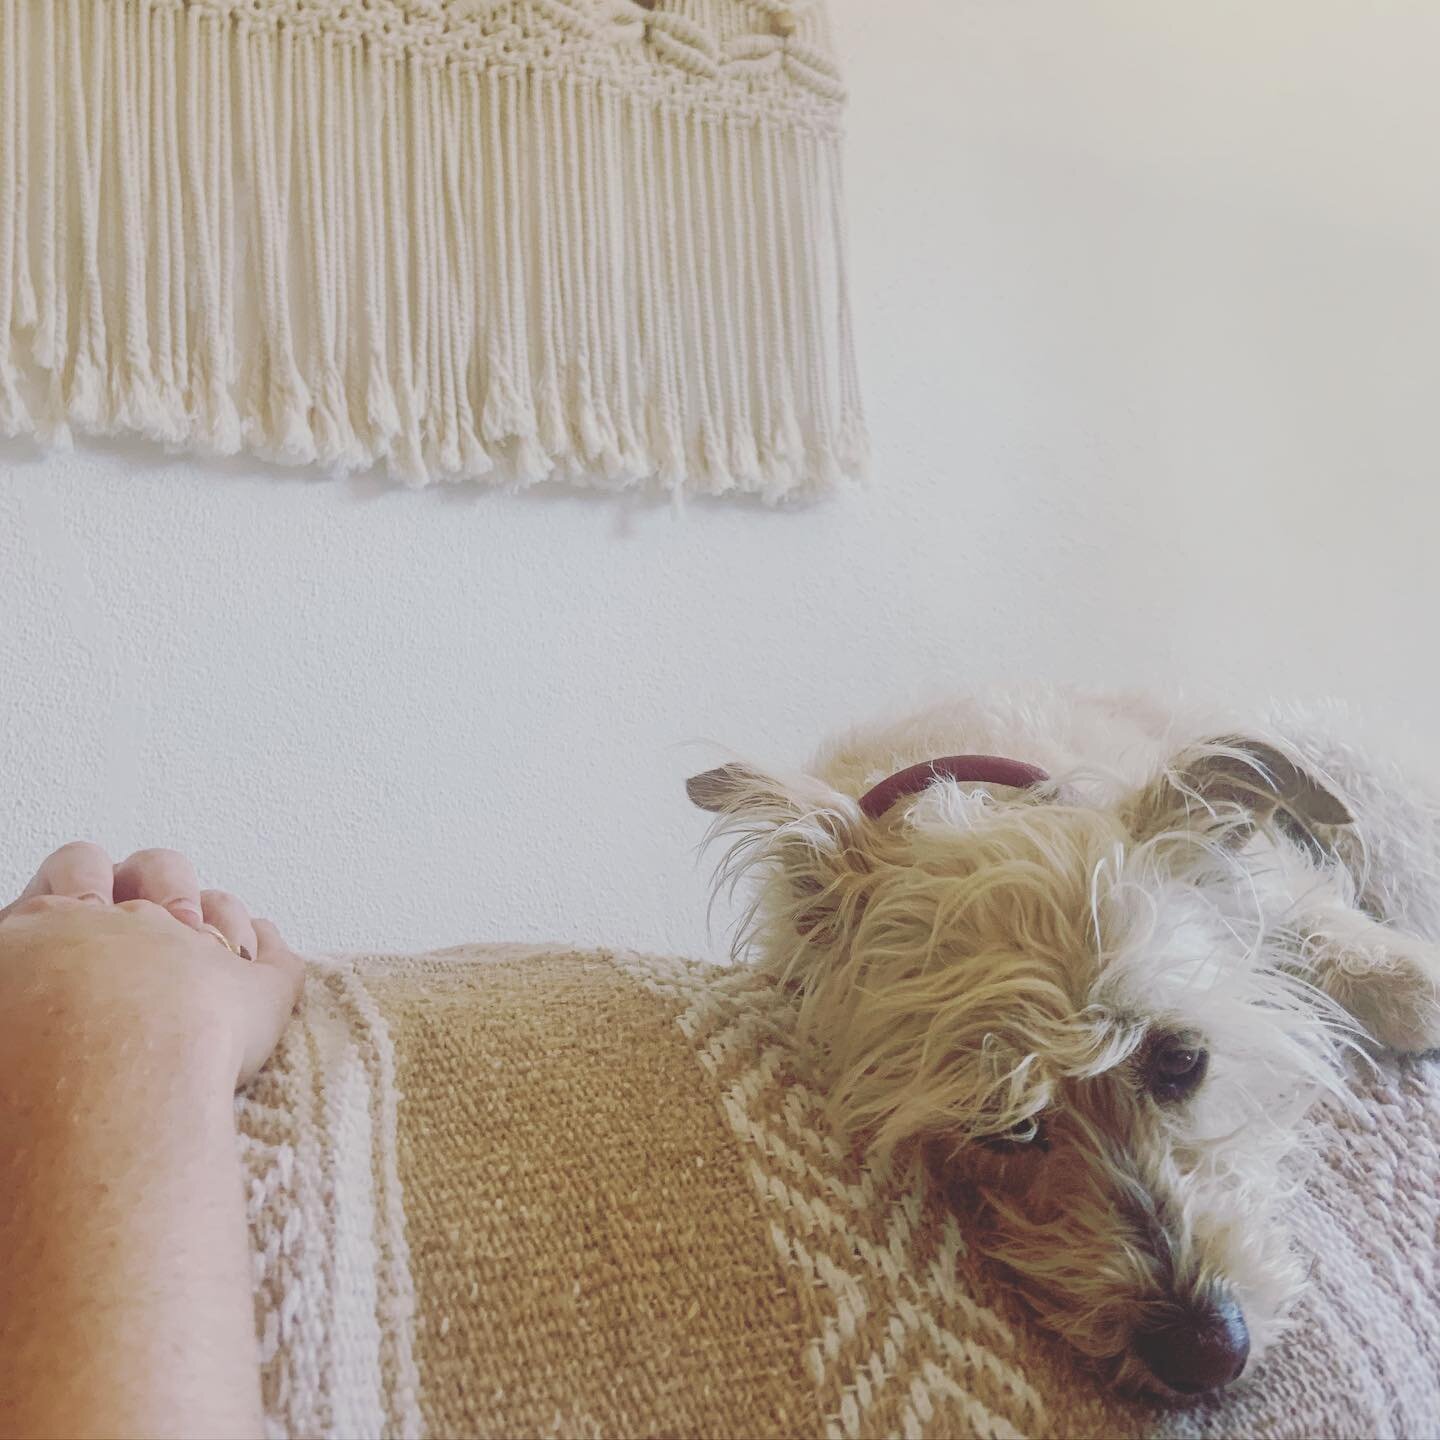 Sweet @lenulacachorra enjoying a Somatic Facial Experience with her Mama 🌸 Dogs are welcome into the magical portal ~ They are so receptive to the meditative realms that are accessed during the treatment 💓